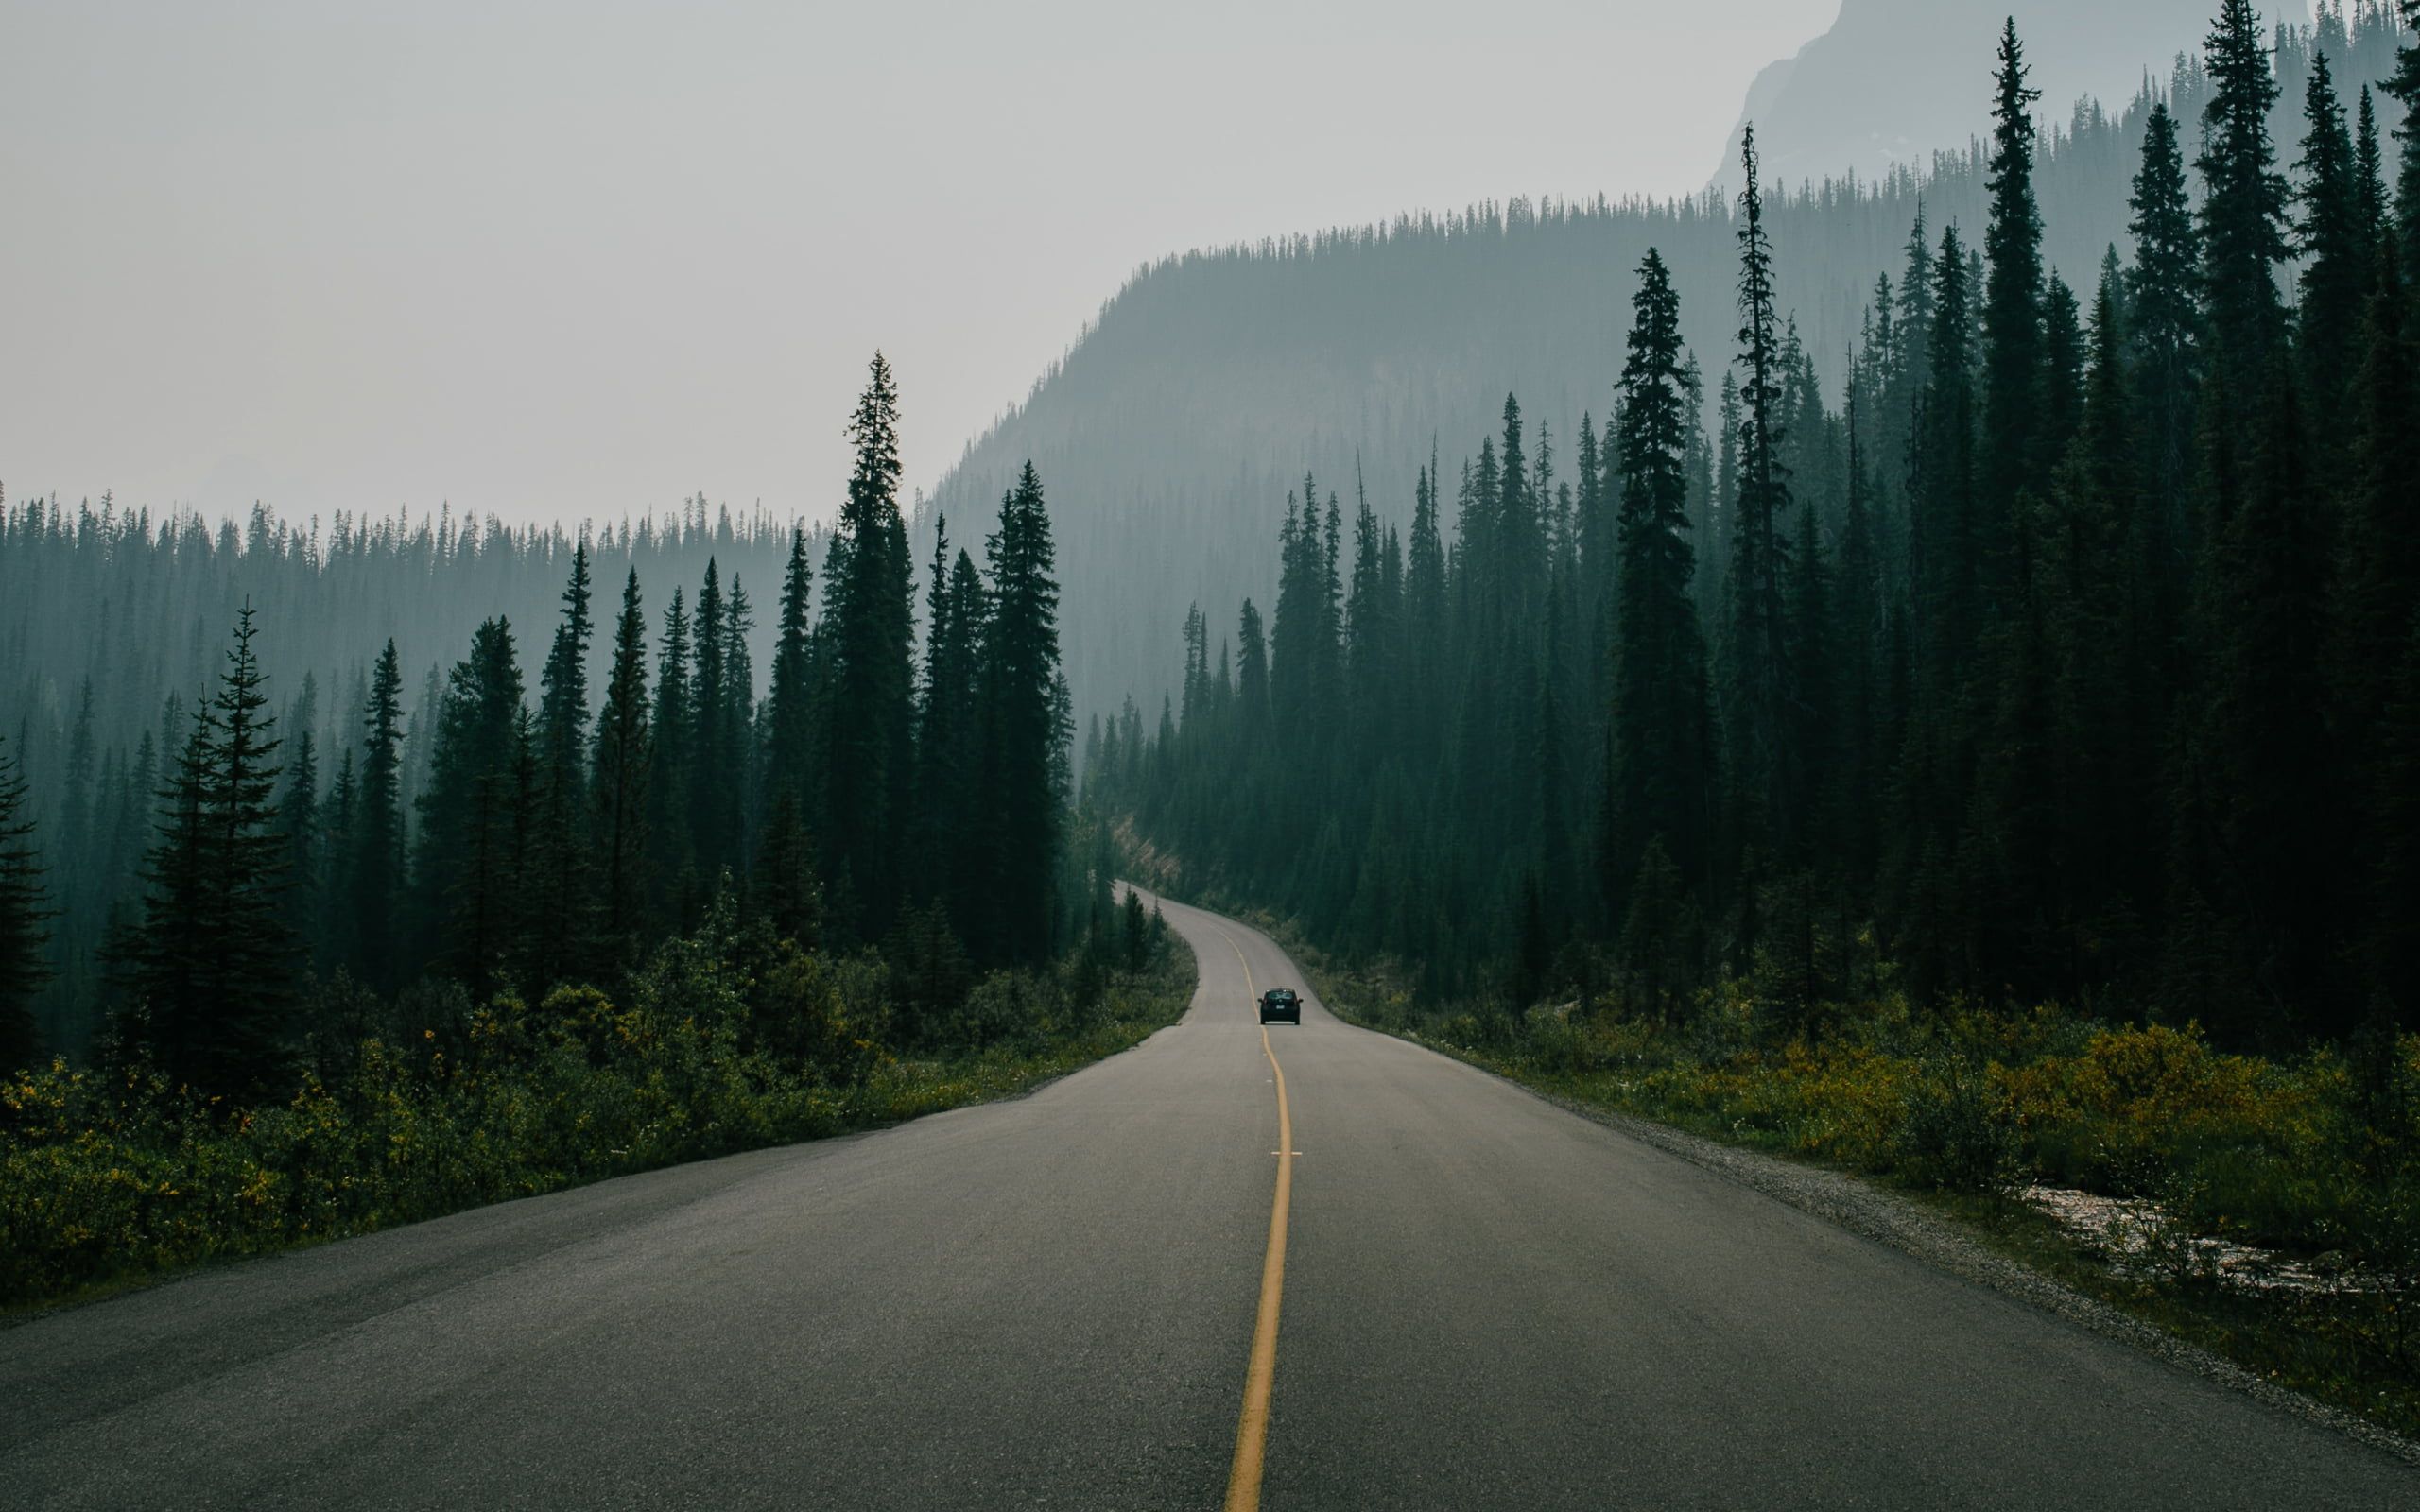 road surrounded with trees #nature #landscape #road #trees #car pine trees # forest. Landscape wallpaper, Nature wallpaper, Computer wallpaper desktop wallpaper